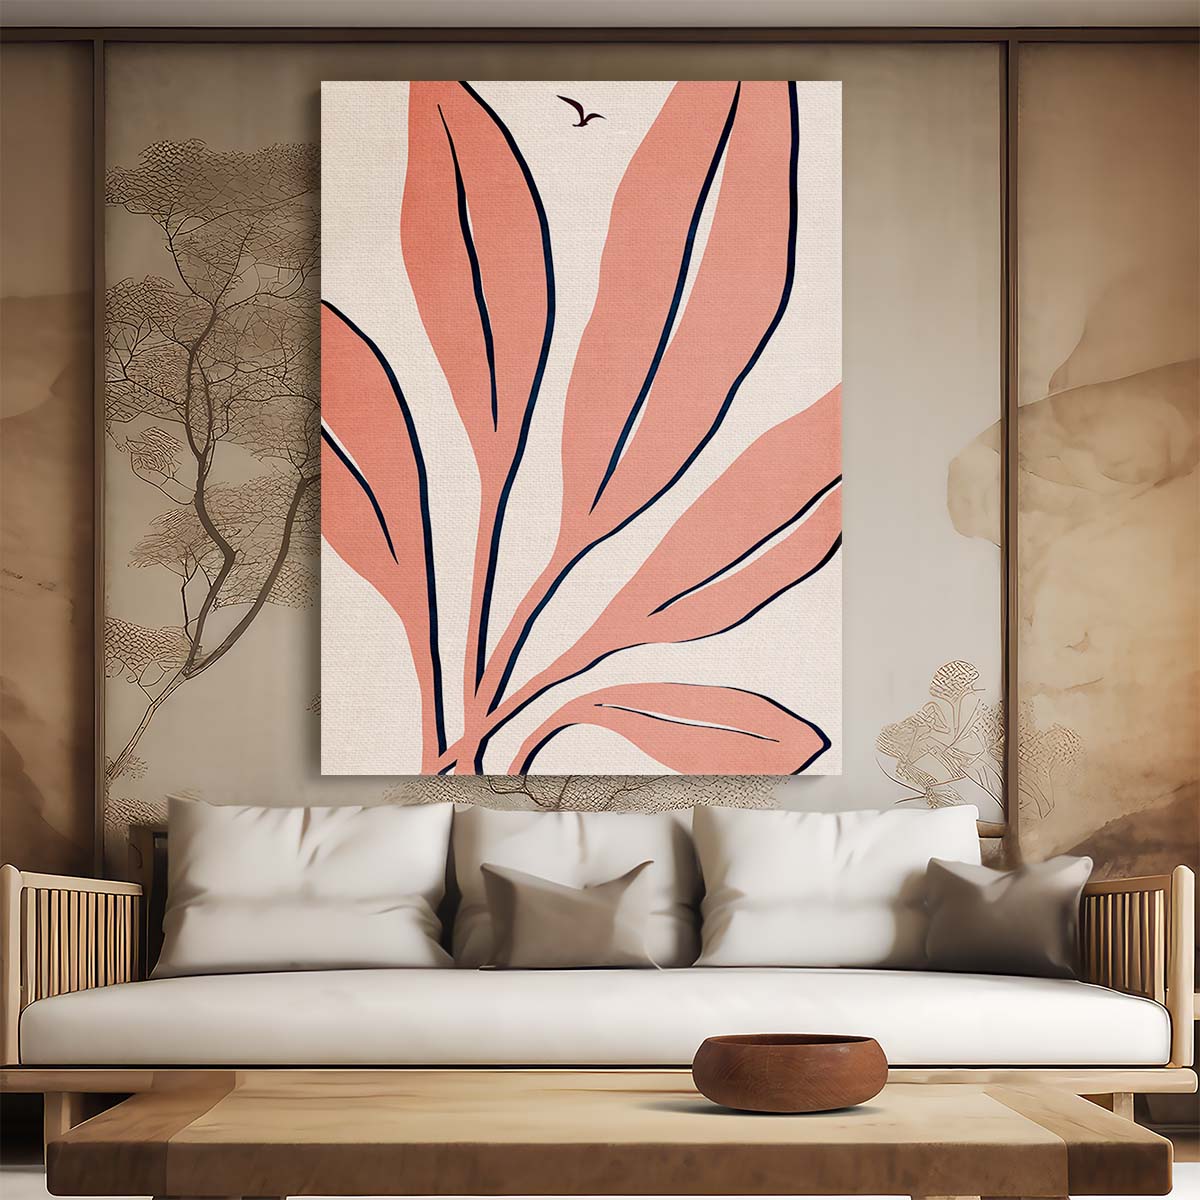 Kubistika's Bright Pink Ophelia Rose Illustration with Red Bird by Luxuriance Designs, made in USA